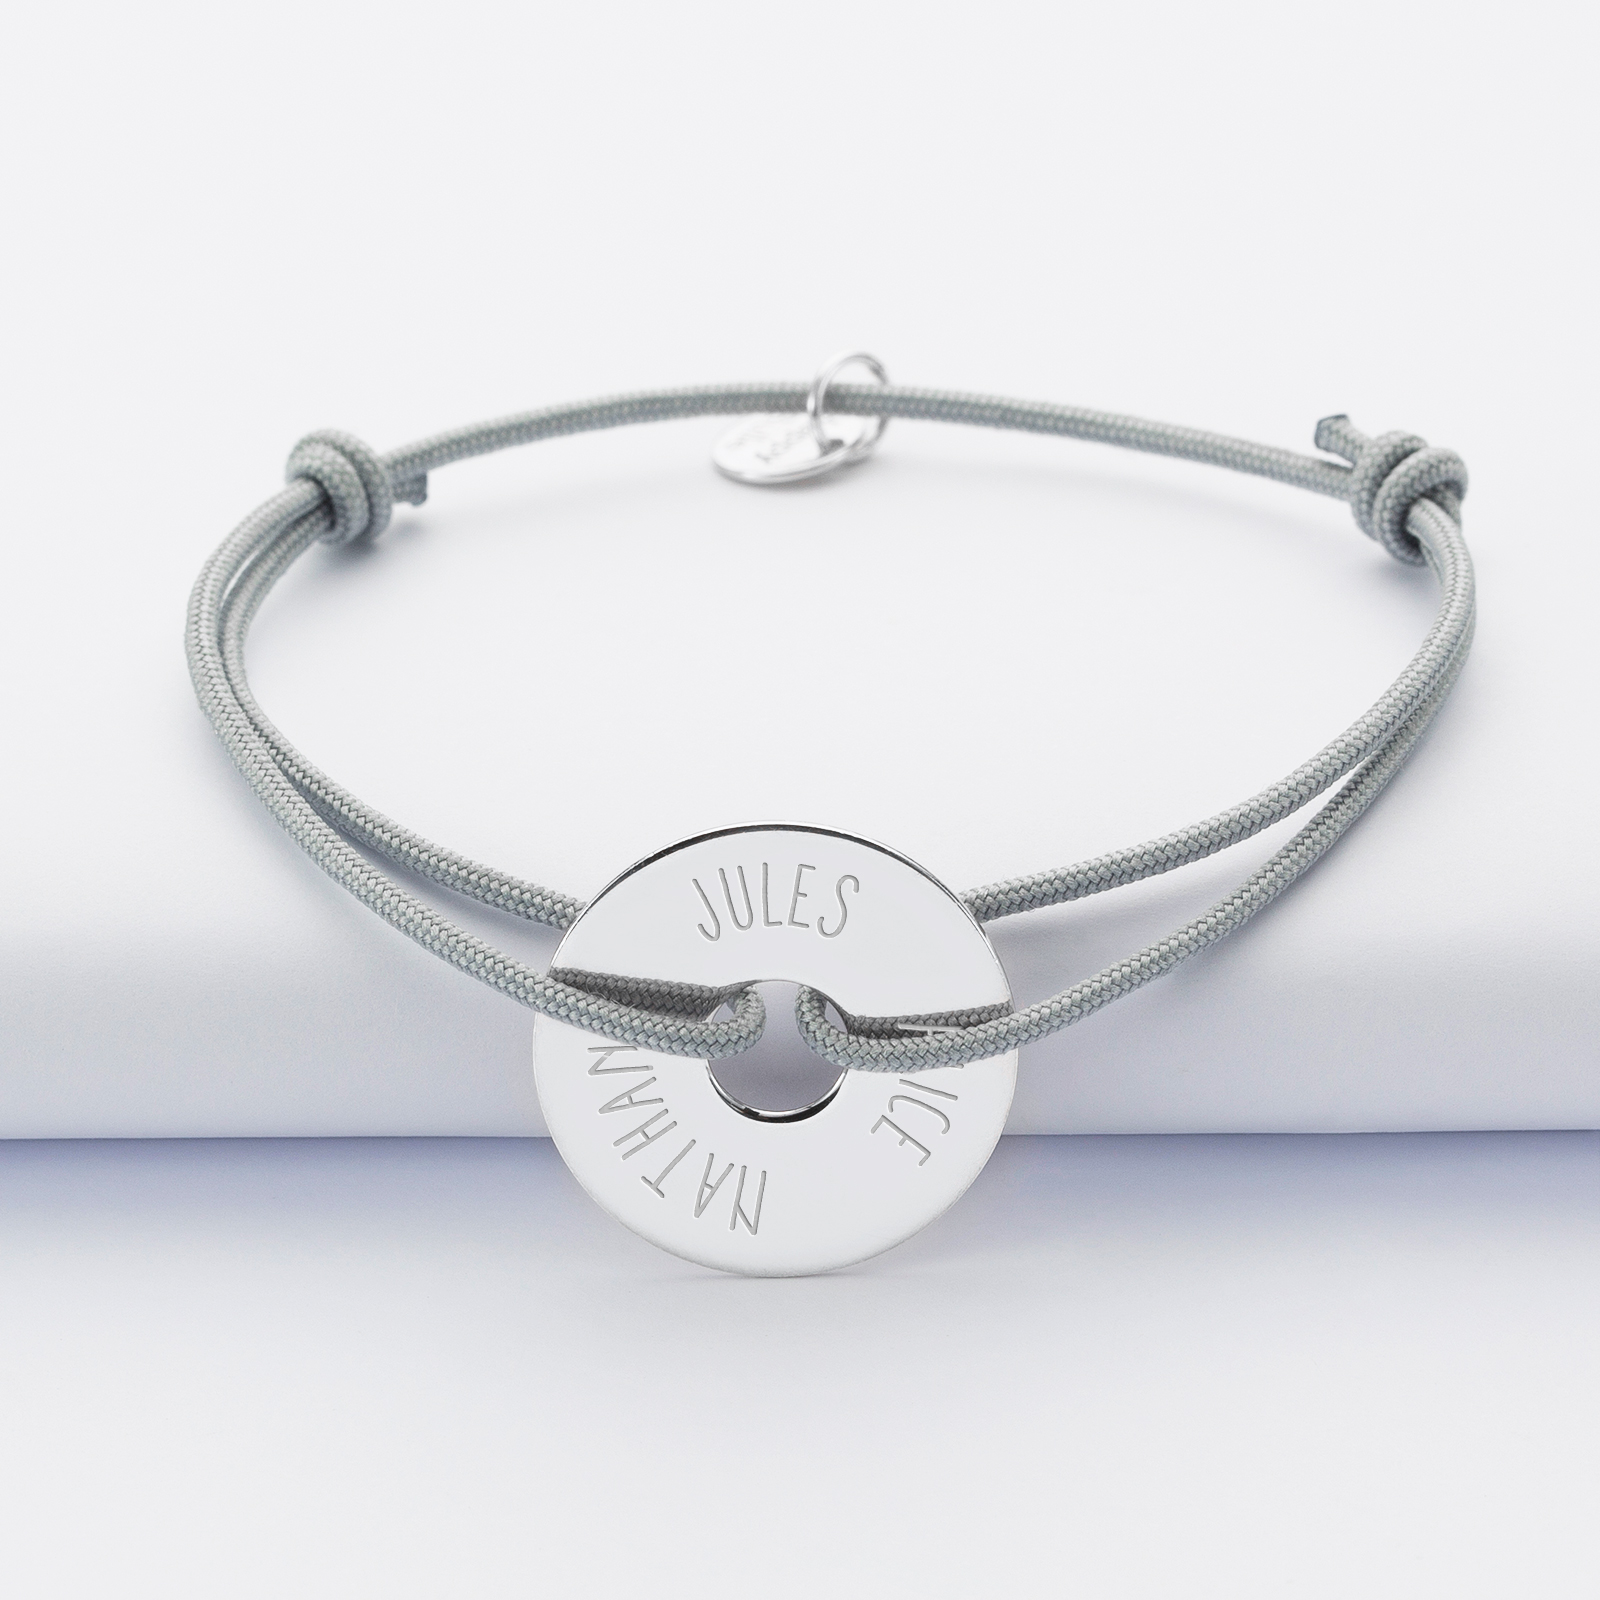 Personalised bracelet engraved silver open disc 20mm